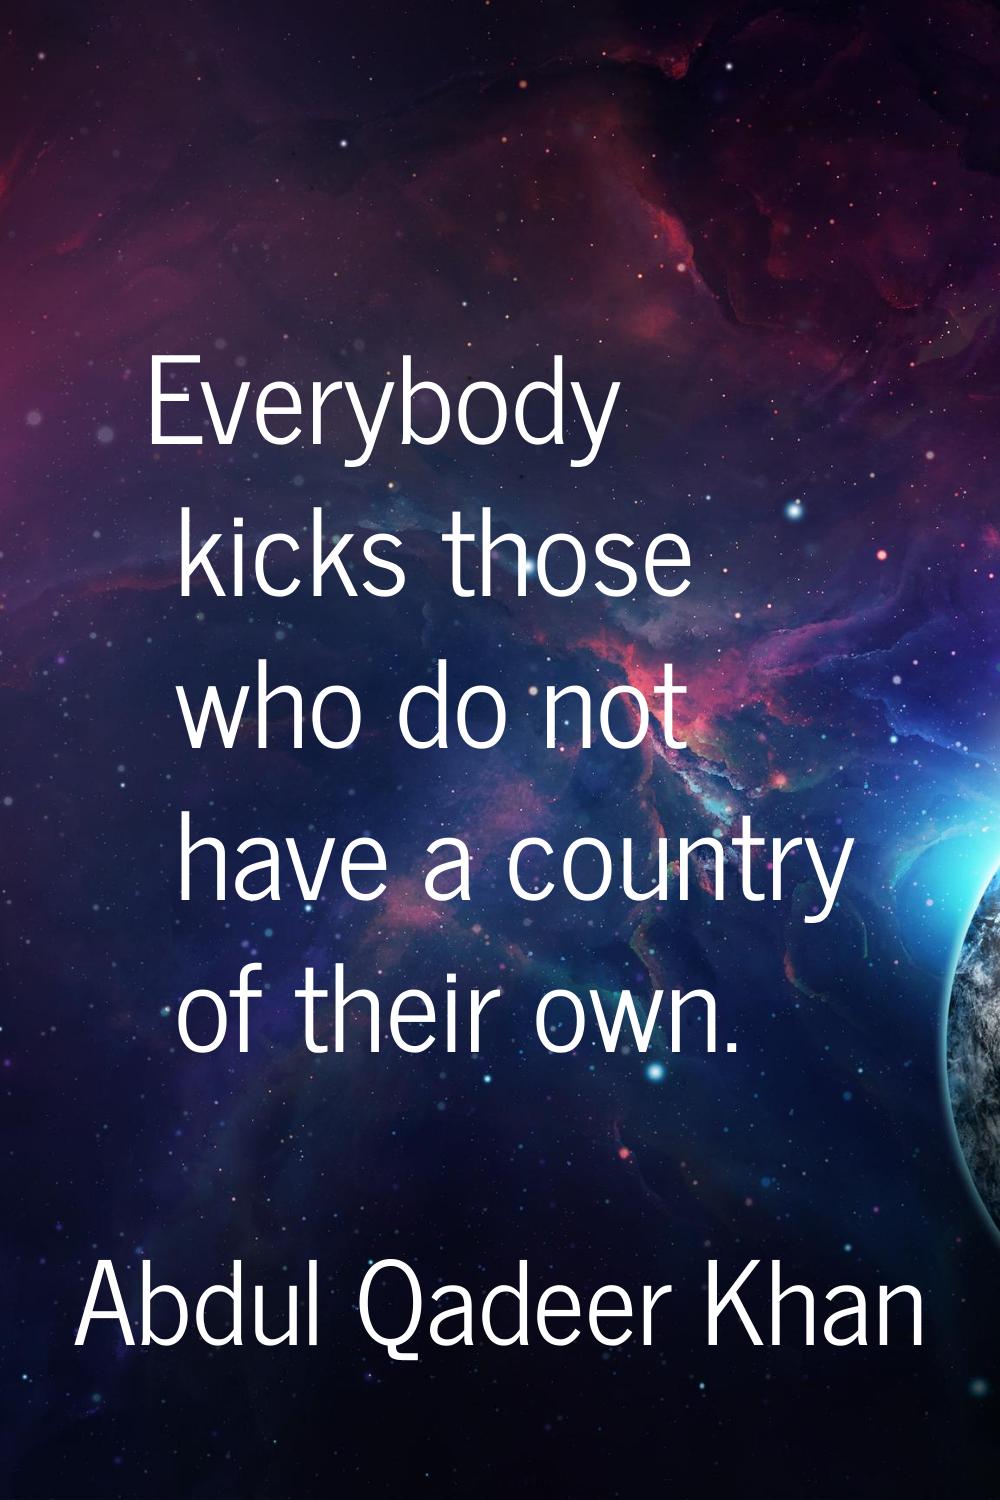 Everybody kicks those who do not have a country of their own.